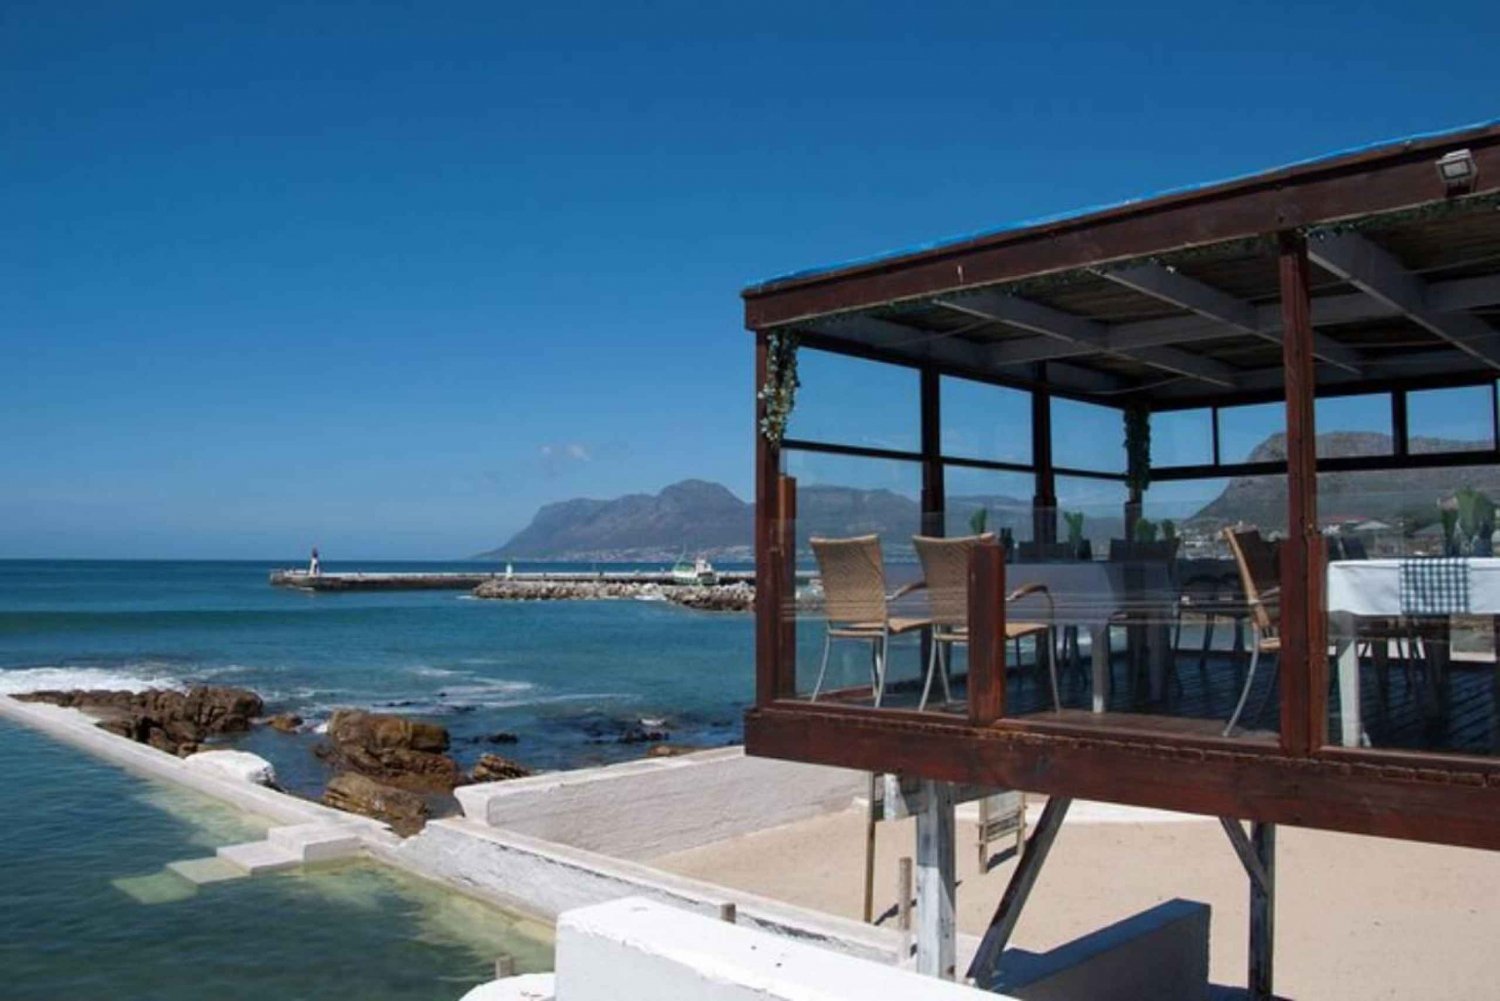 Muizenberg to Kalk Bay: A Self-Guided Audio Tour